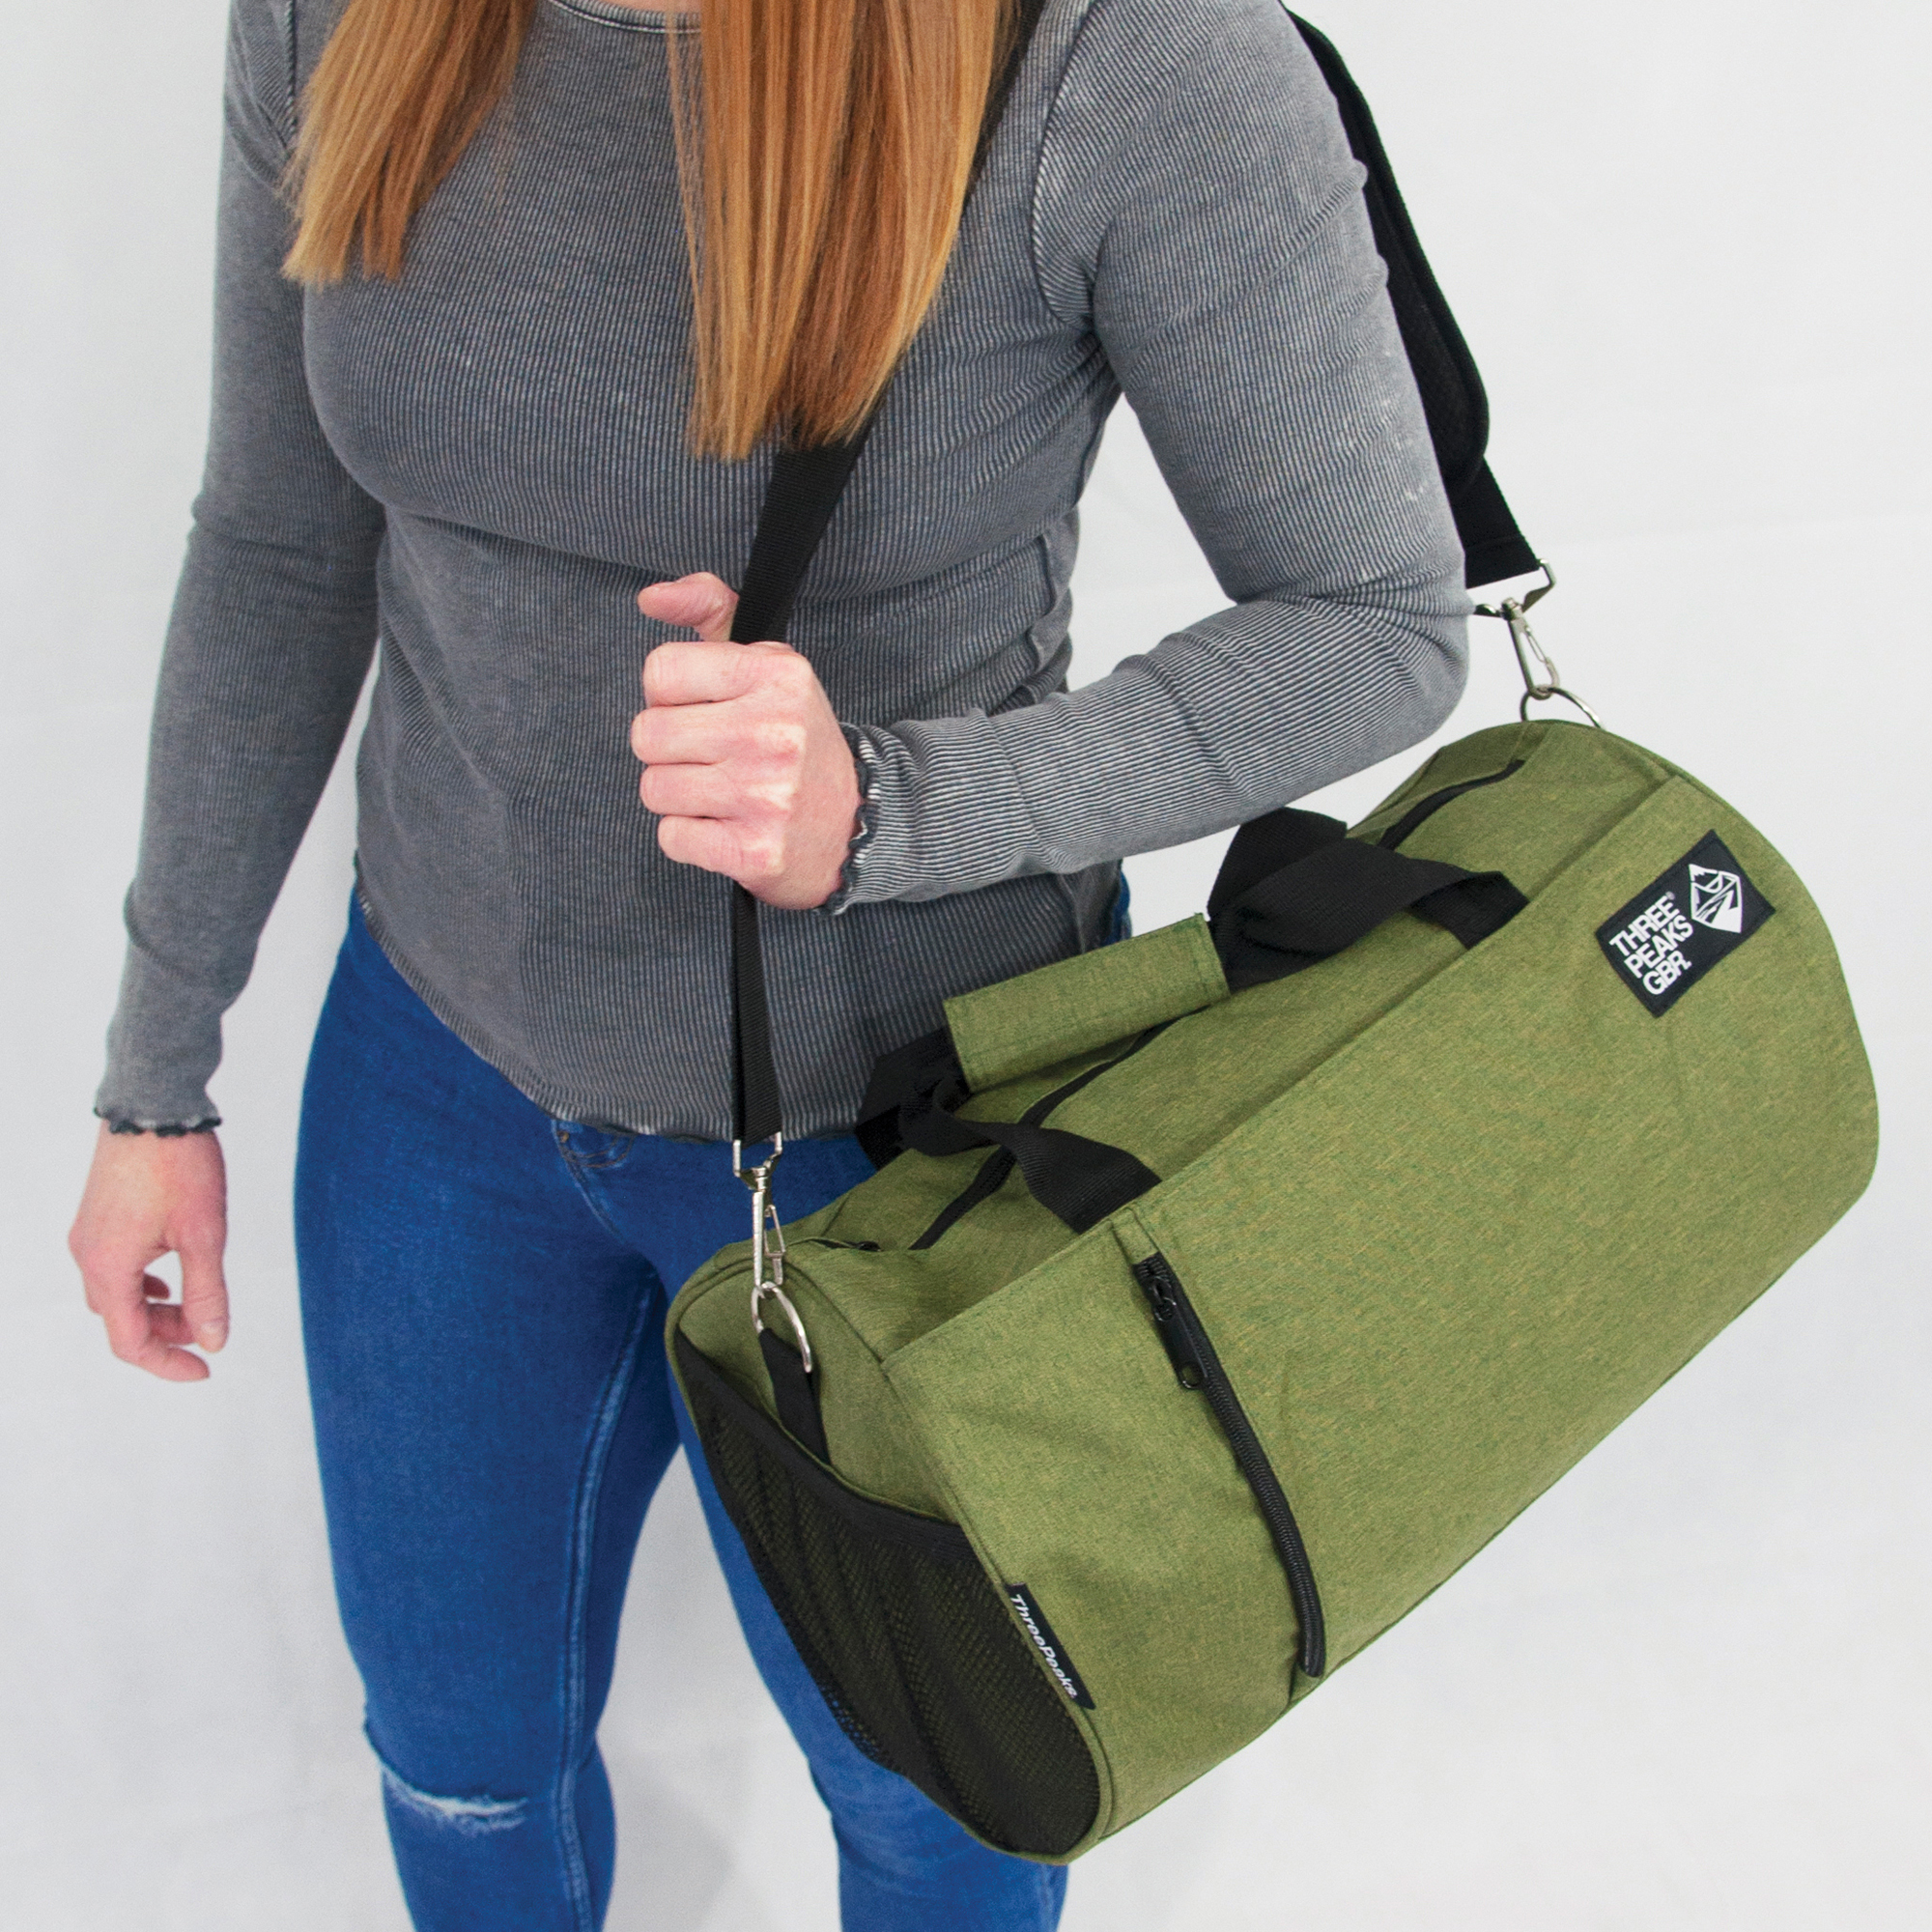 Three Peaks® branded barrel bag made from 12 recycled PET single-use bottles. 600D RPET makes it soft yet durable, perfect for use as a gym bag or for travelling. Features large 22L capacity, robust water resistant exterior, ventilated side pocket for swimwear and shoes to keep them separate from the main compartment, plus one interior pocket and 3 more outer pockets.